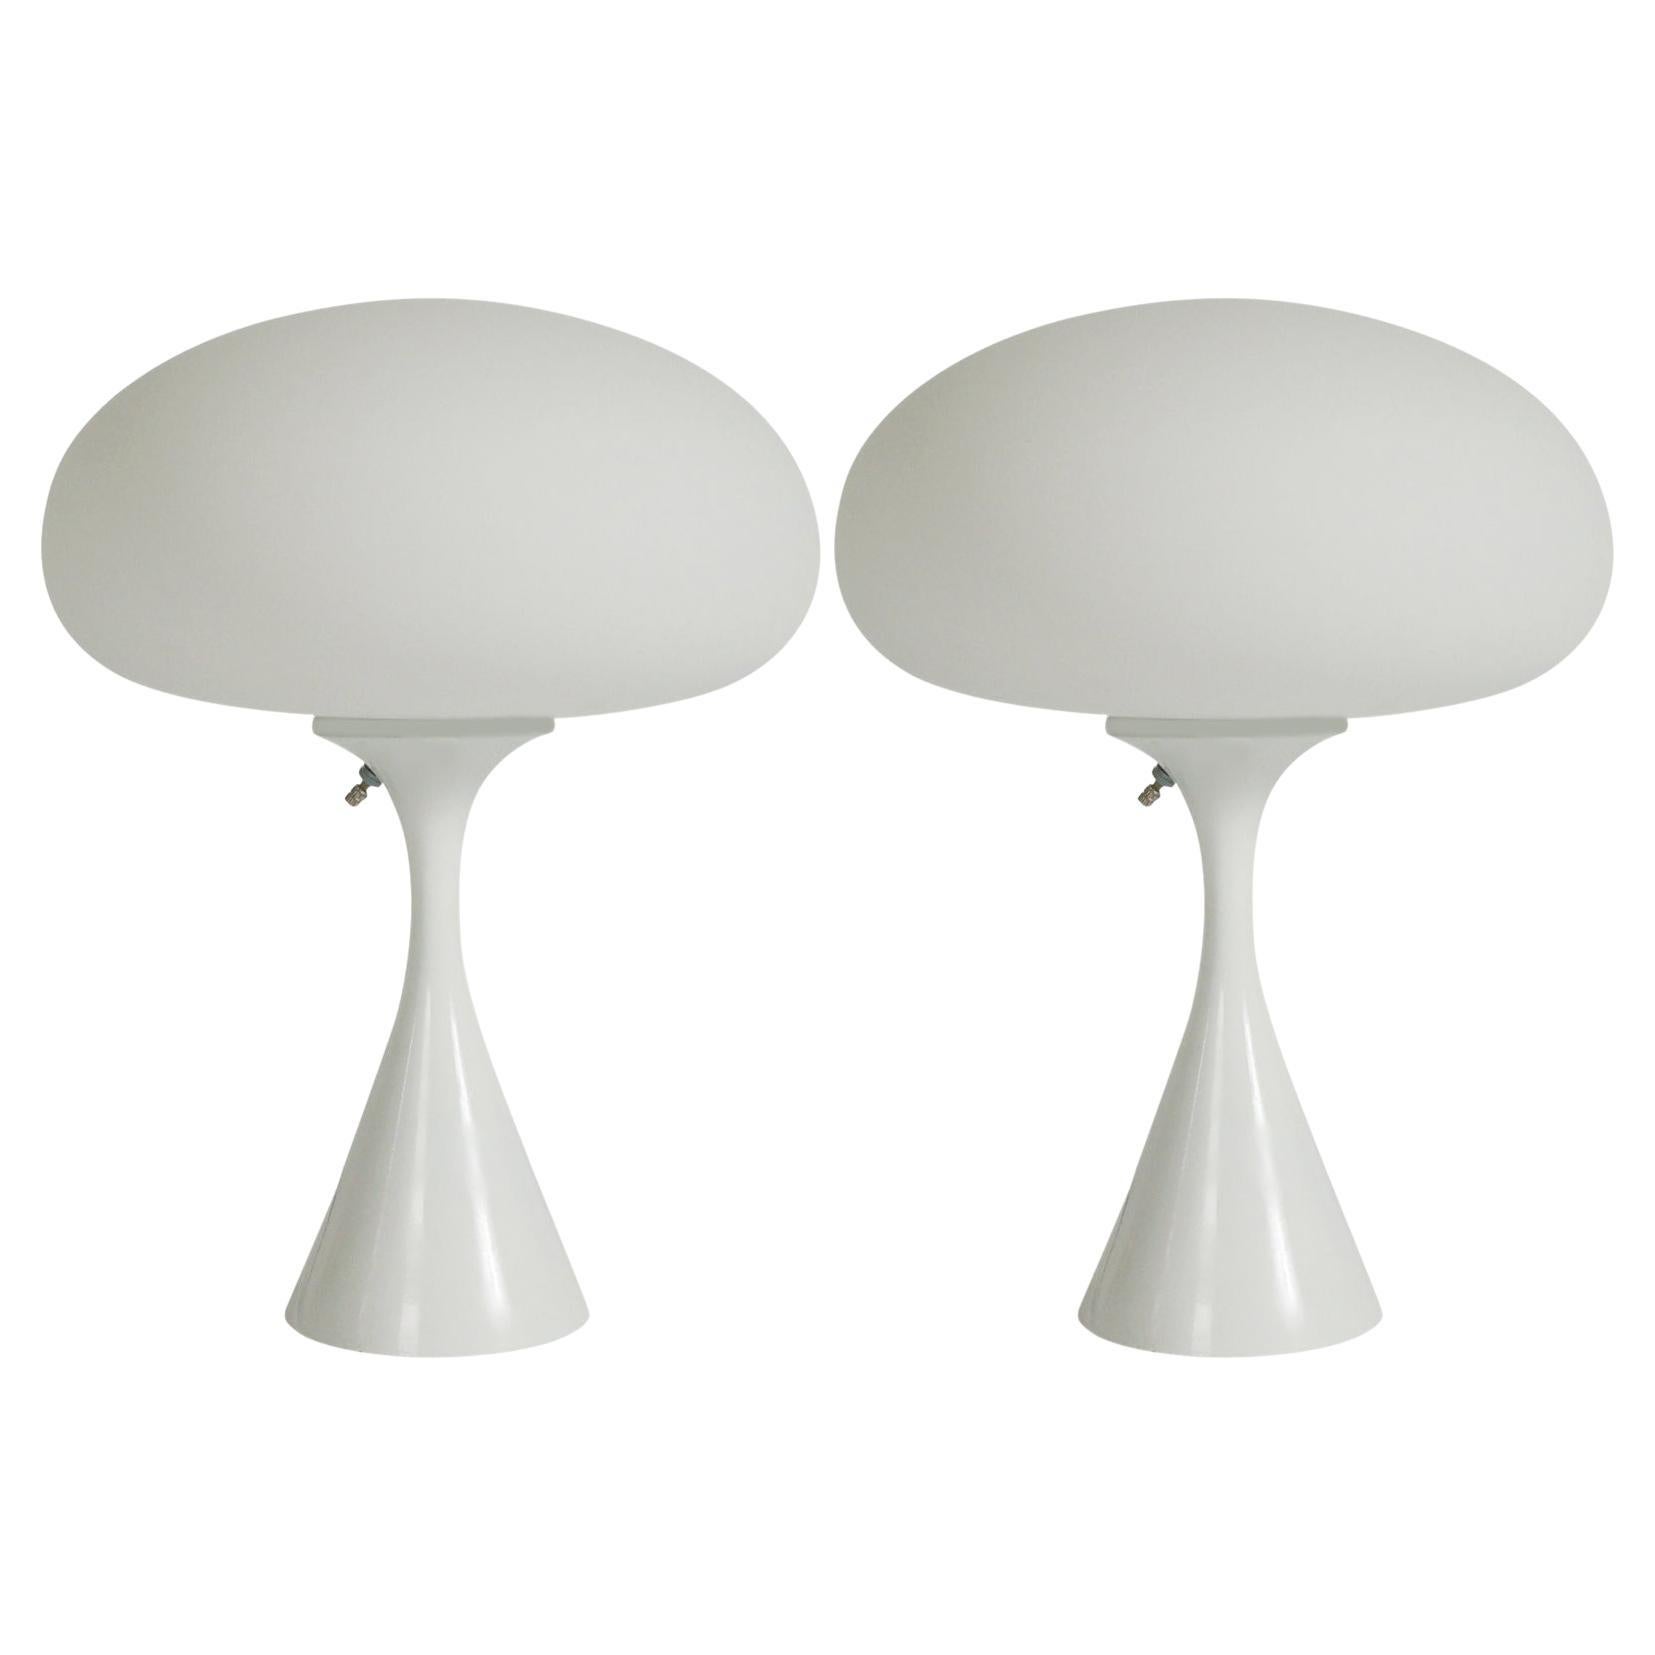 Pair of Mid-Century Modern Table Lamps by Designline in White on White Glass For Sale